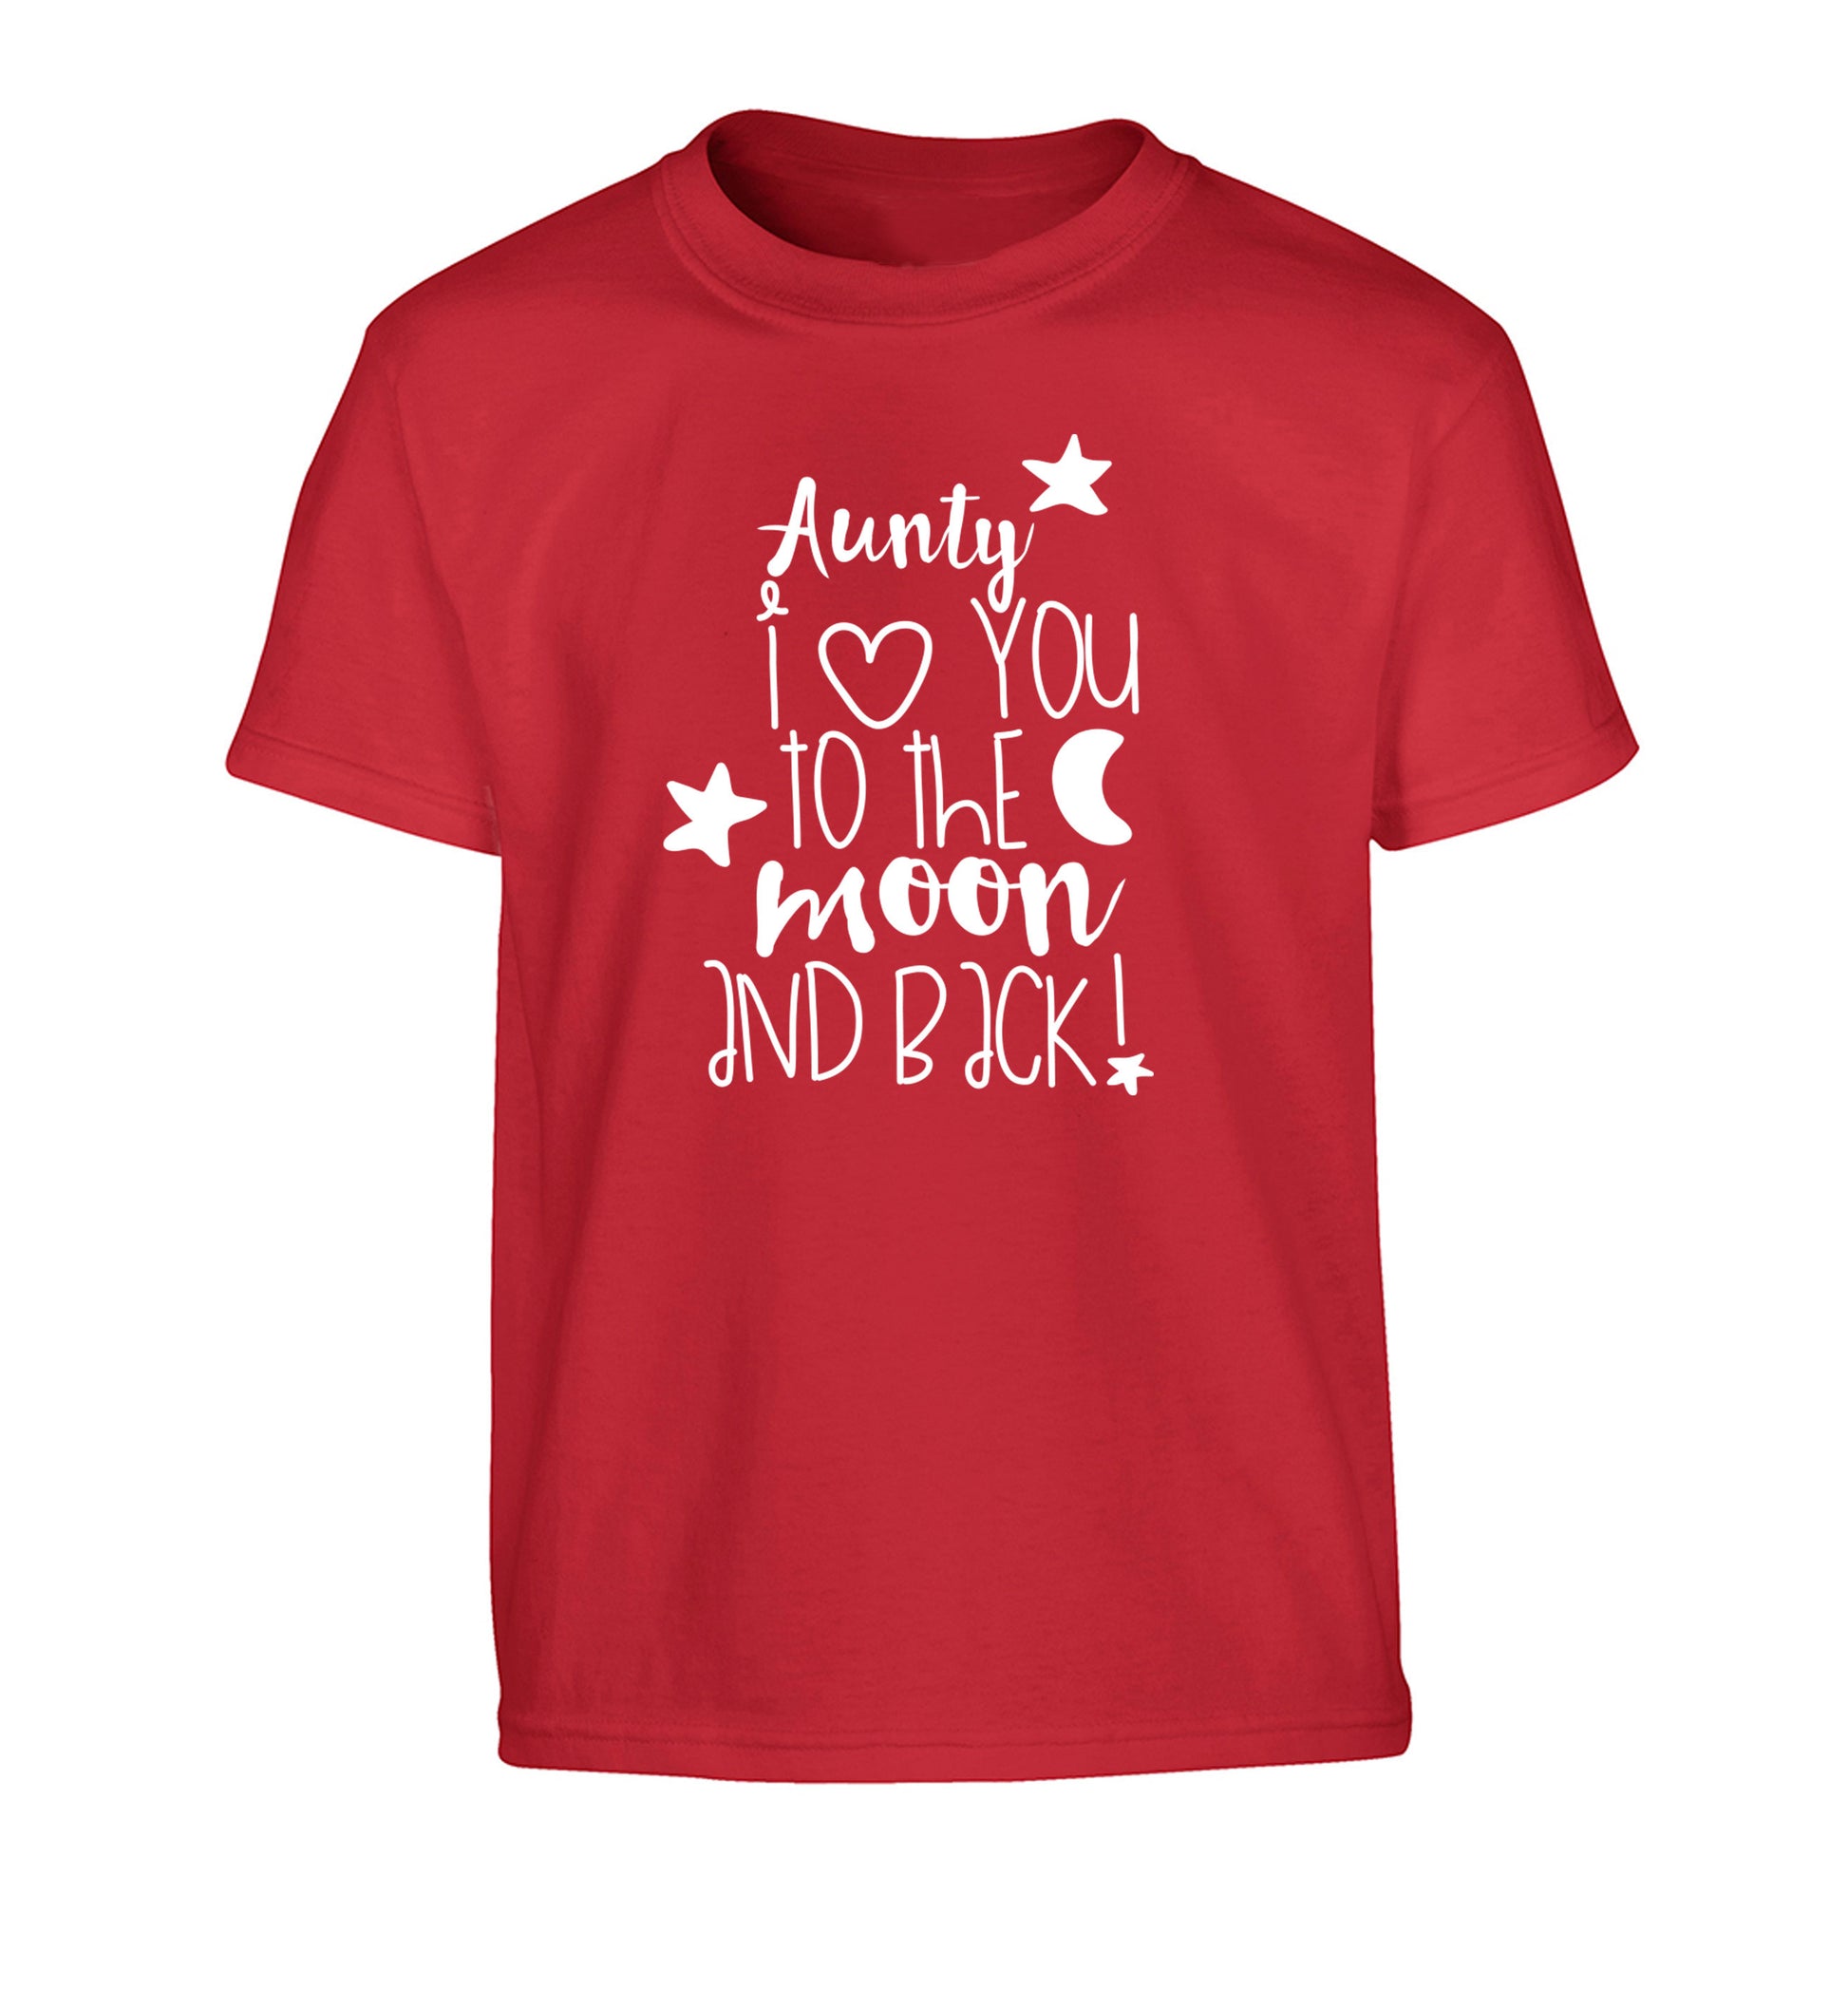 Aunty I love you to the moon and back Children's red Tshirt 12-14 Years